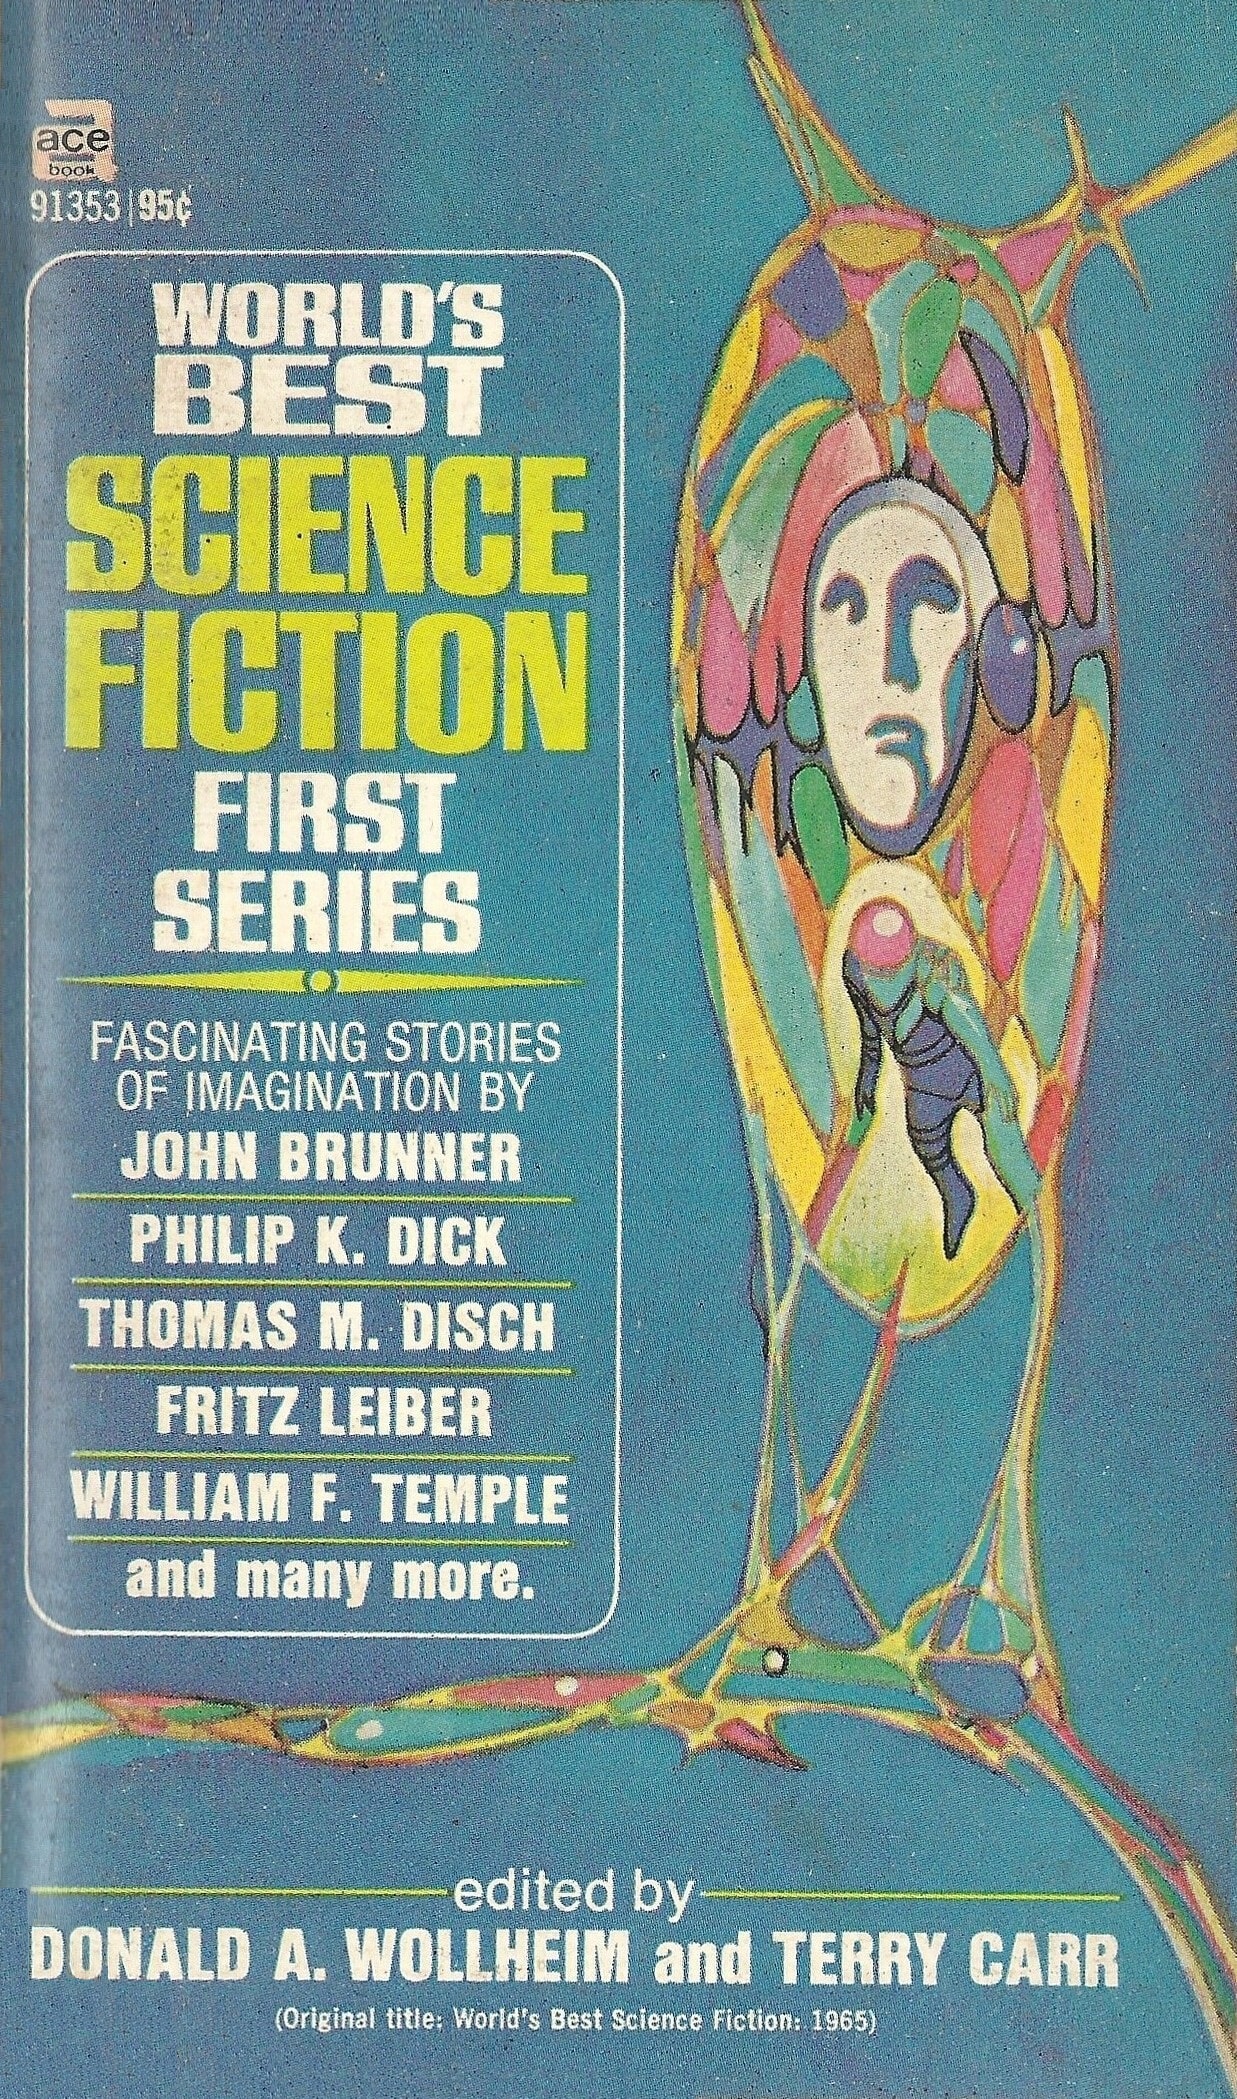 Vintage Treasures: World’s Best Science Fiction First Series edited by Donald A. Wollheim and Terry Carr